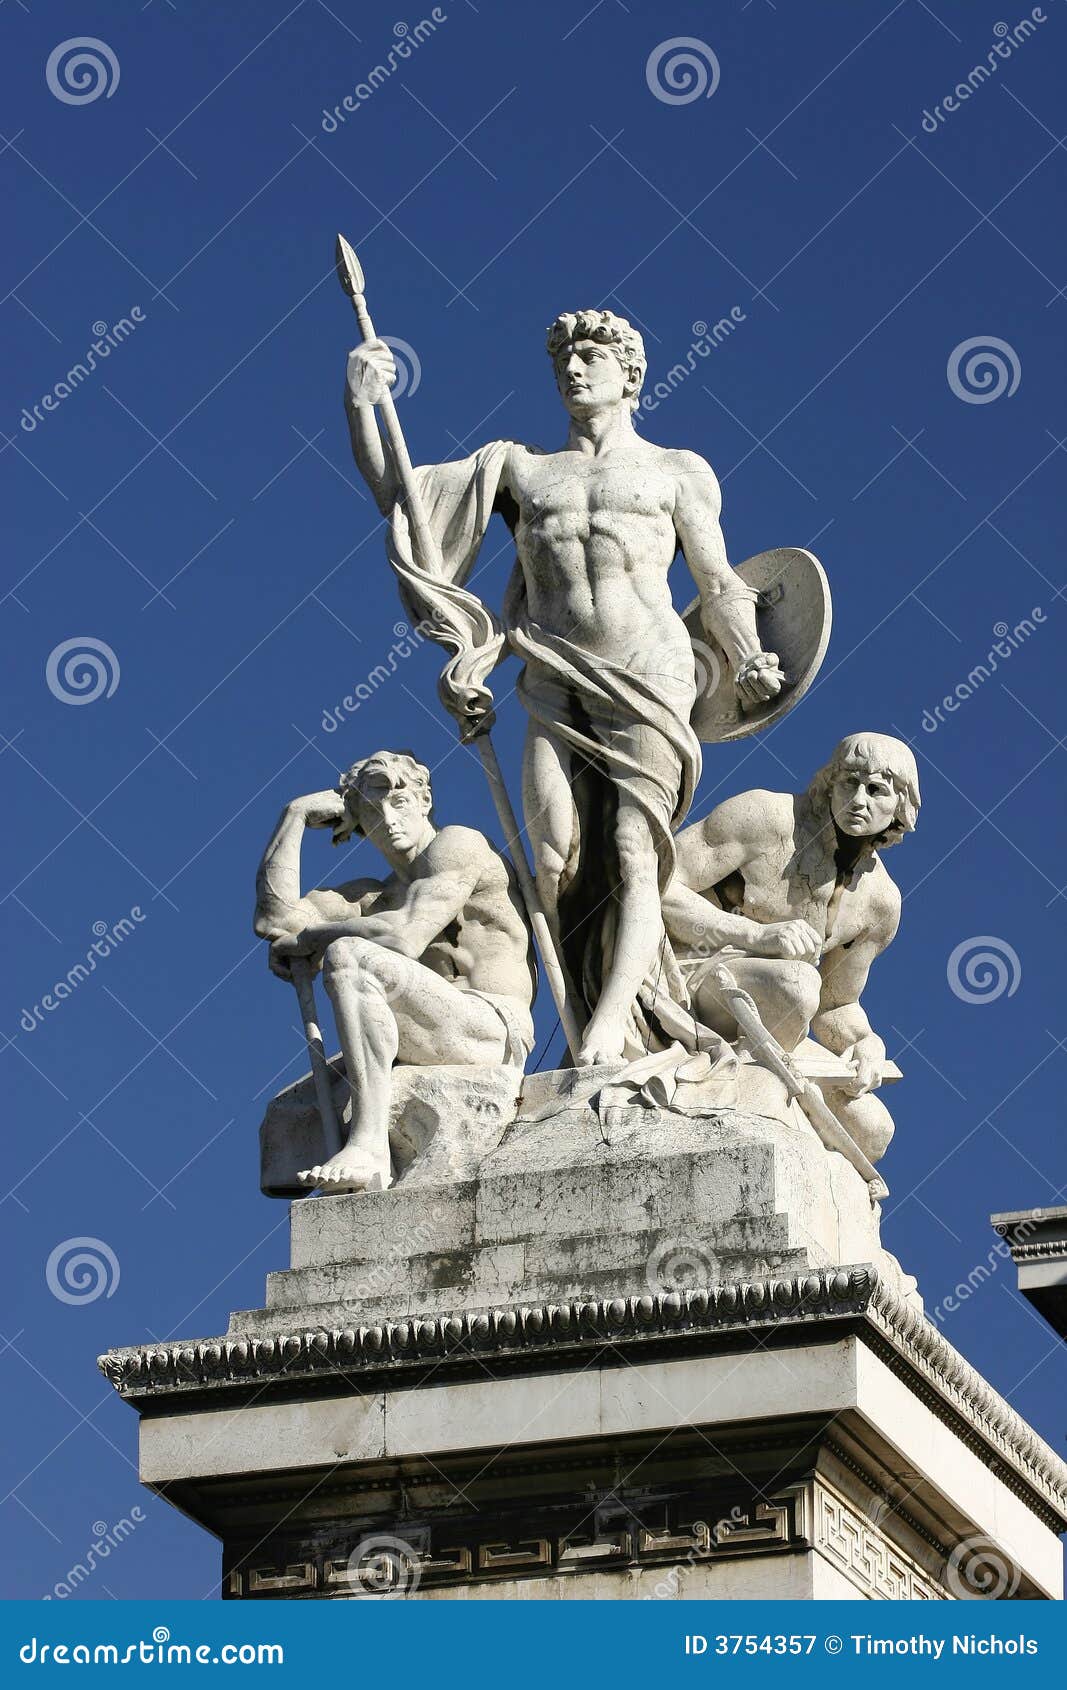 statues on the victor emmanuel monument, rome